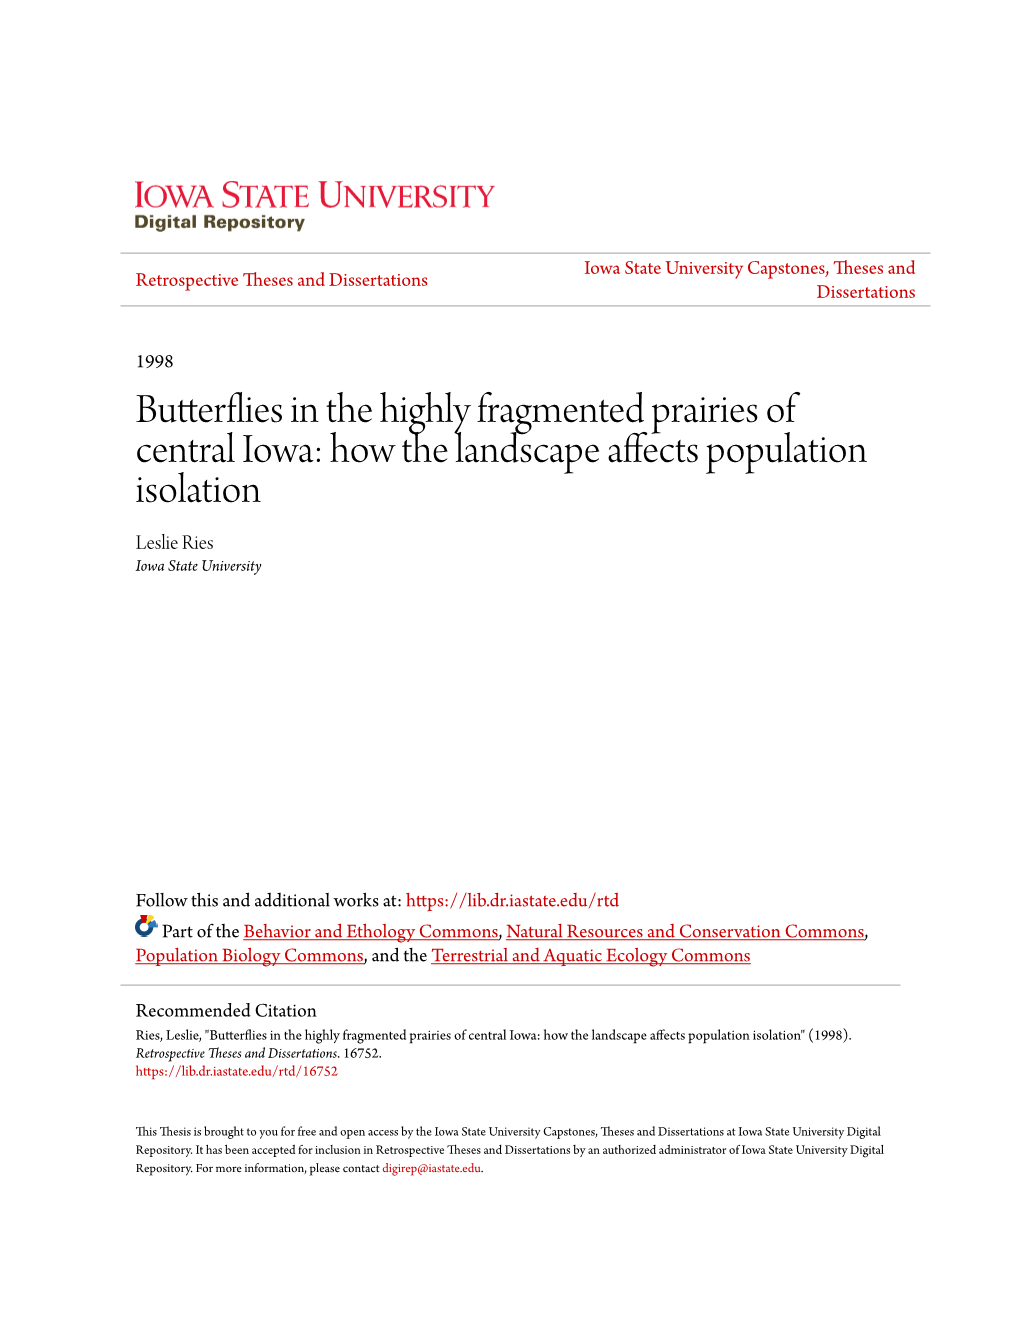 Butterflies in the Highly Fragmented Prairies of Central Iowa: How the Landscape Affects Population Isolation Leslie Ries Iowa State University